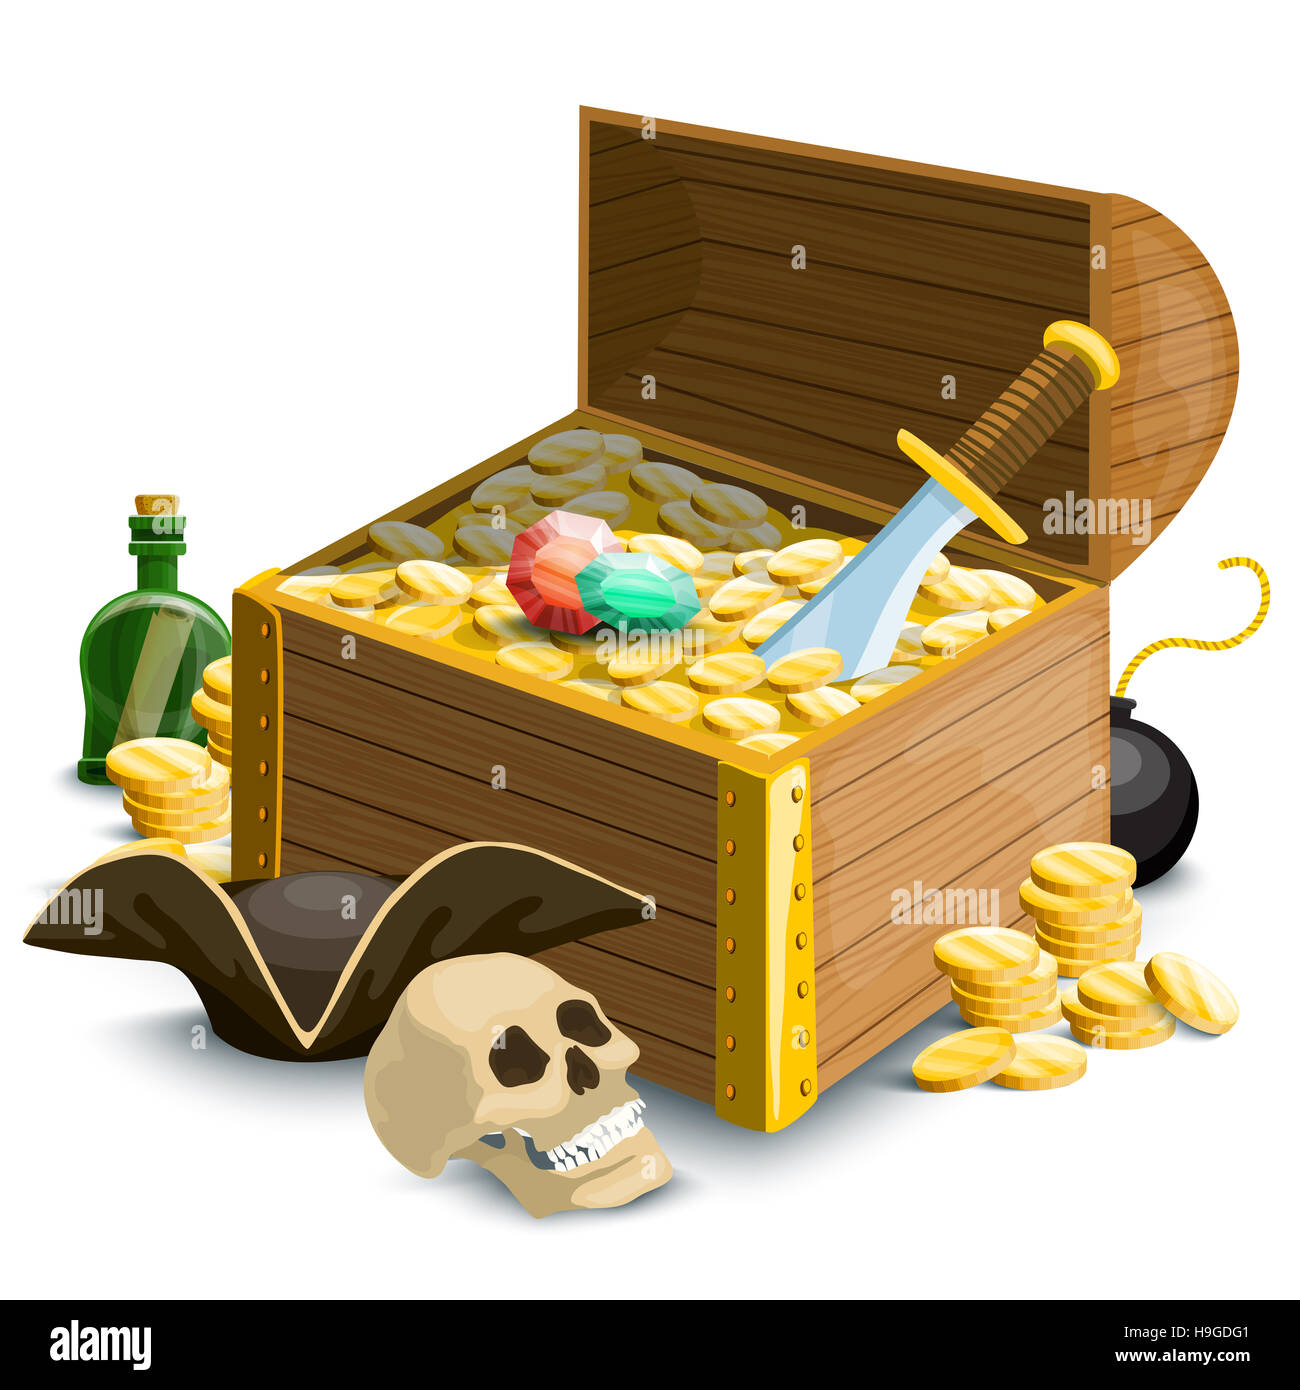 Pirate illustration. Set with coins,pirate treasure chest, skull and other objects Stock Photo